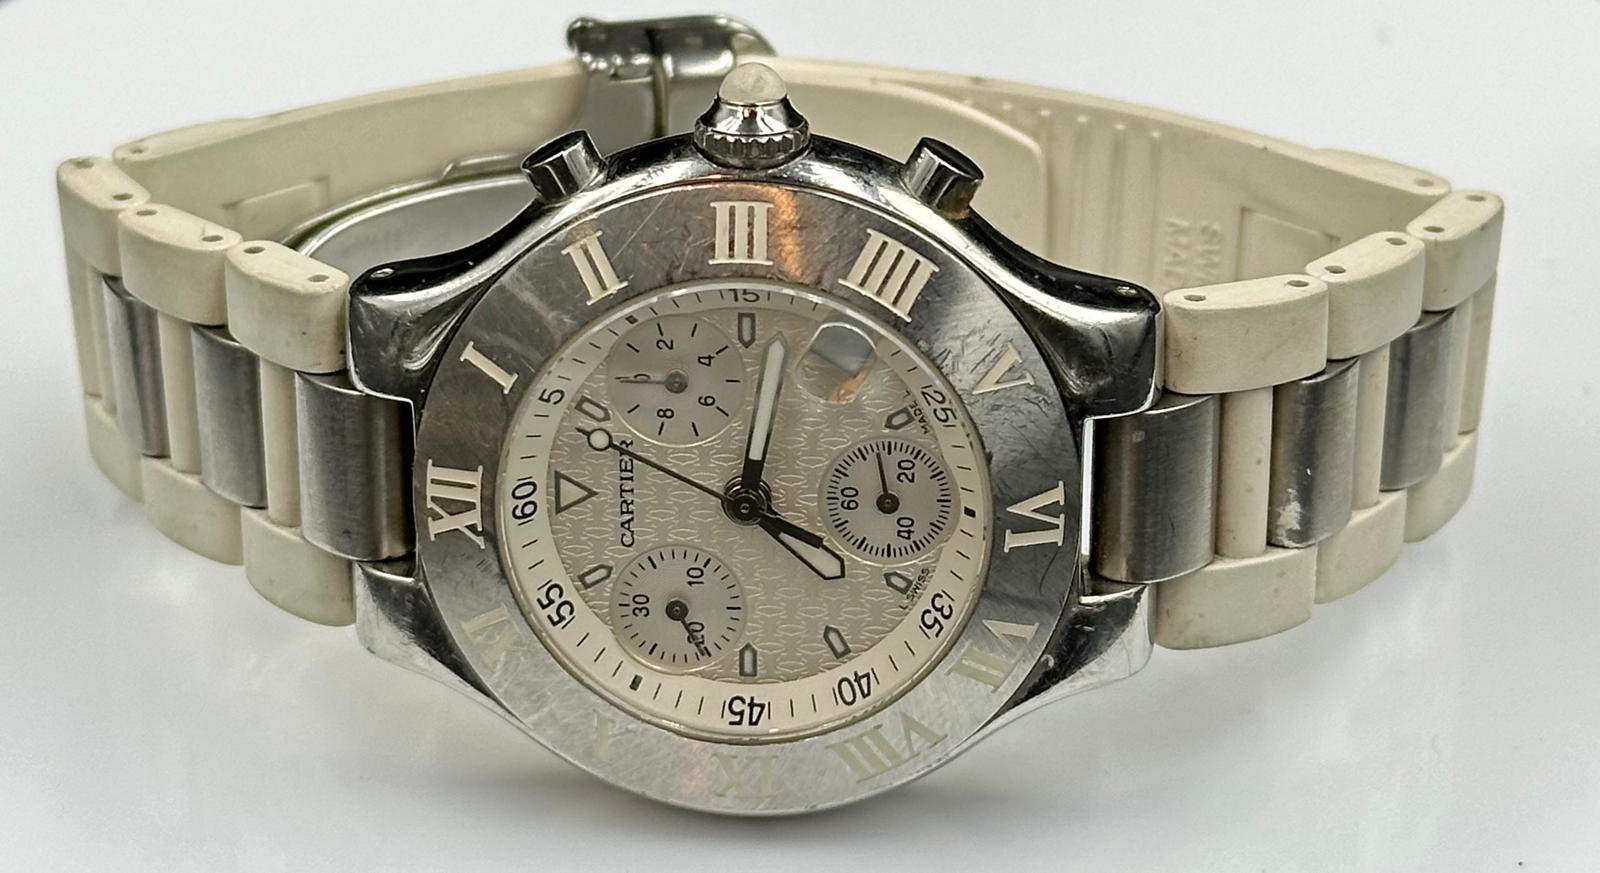 A Cartier Chronoscaph 21 Chronograph in white, stainless steel case, sapphire glass, white patterned - Image 4 of 5